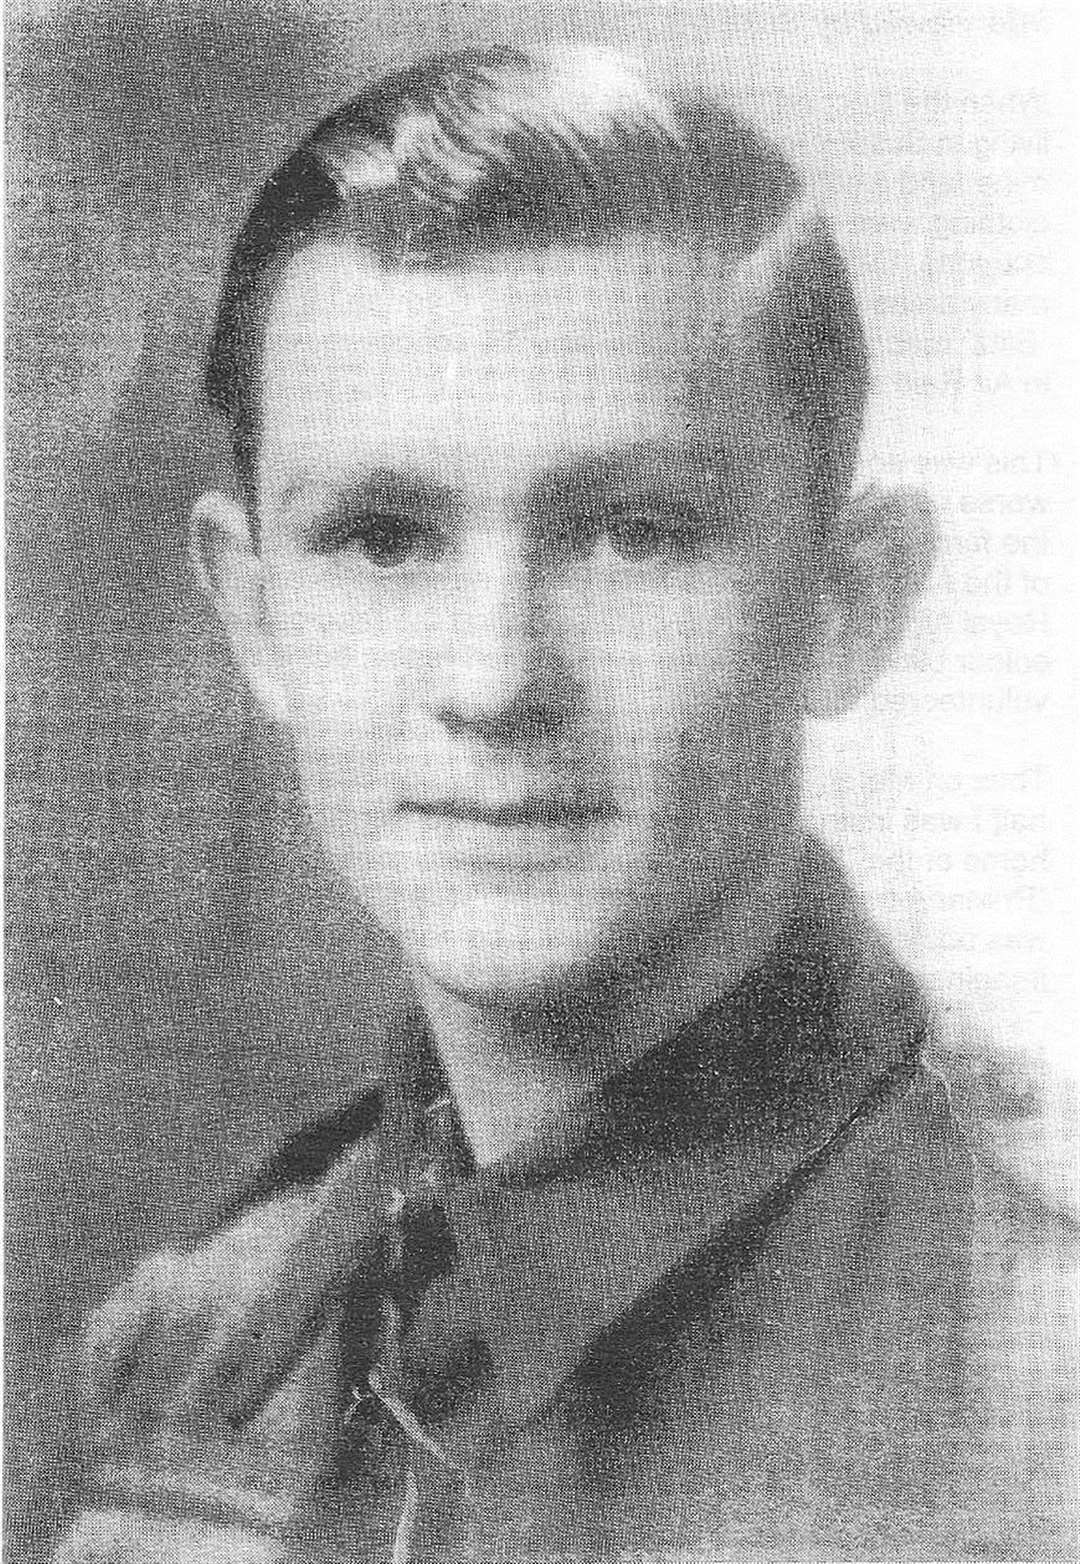 George Batts, shortly before embarking for Normandy